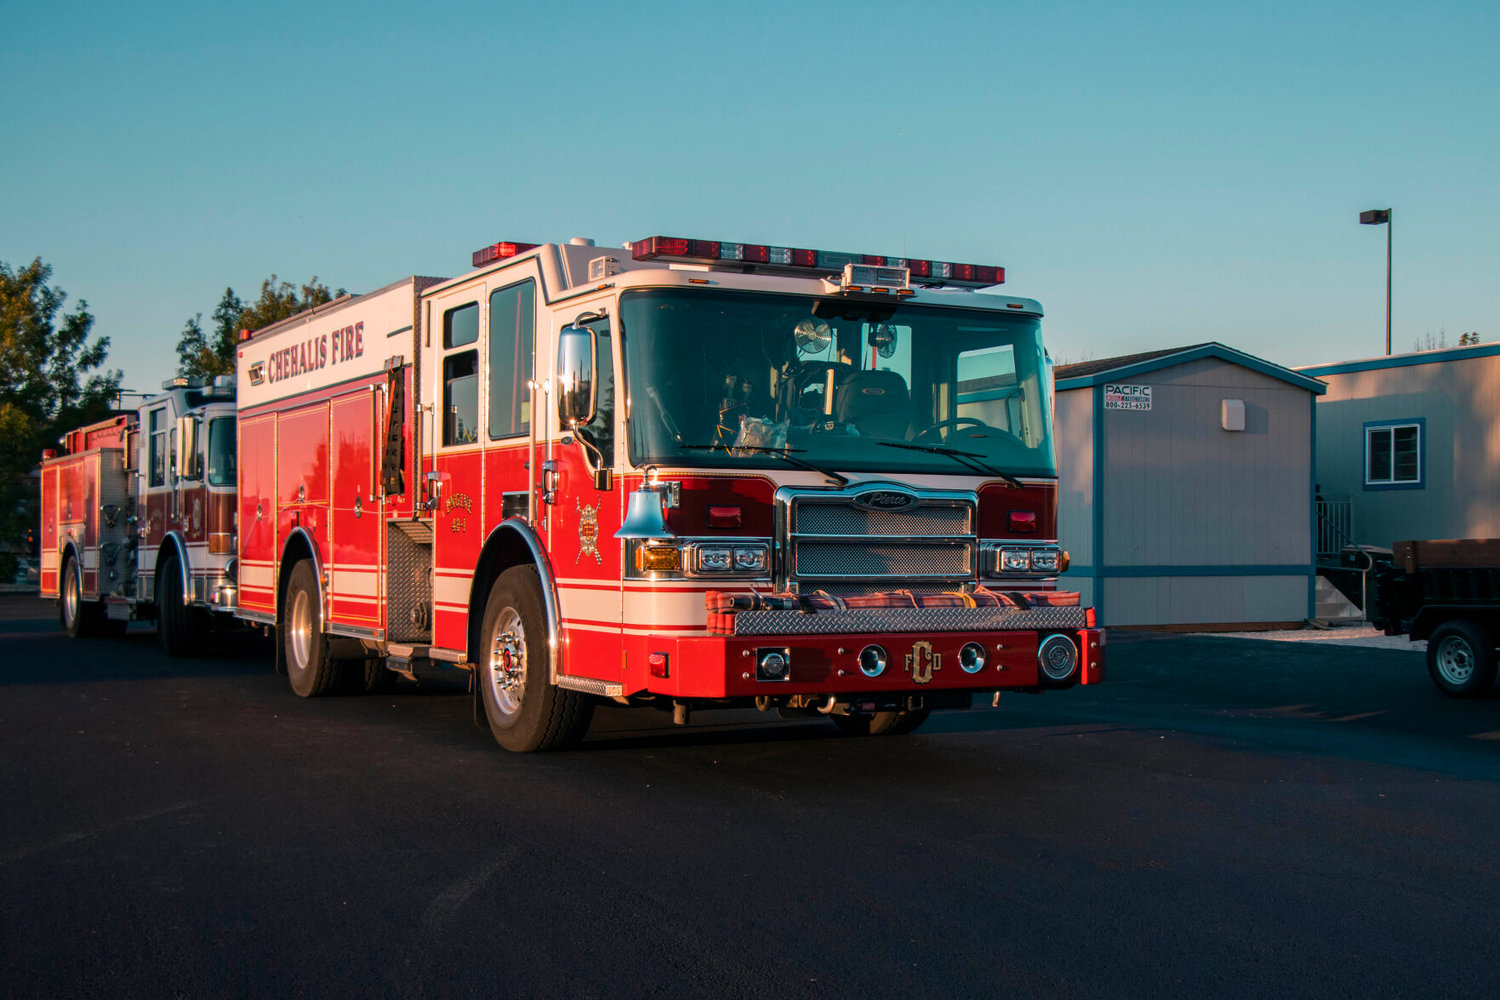 FILE PHOTO — Chehalis Fire Department engines are parked outside a temporary fire station in July 2020.